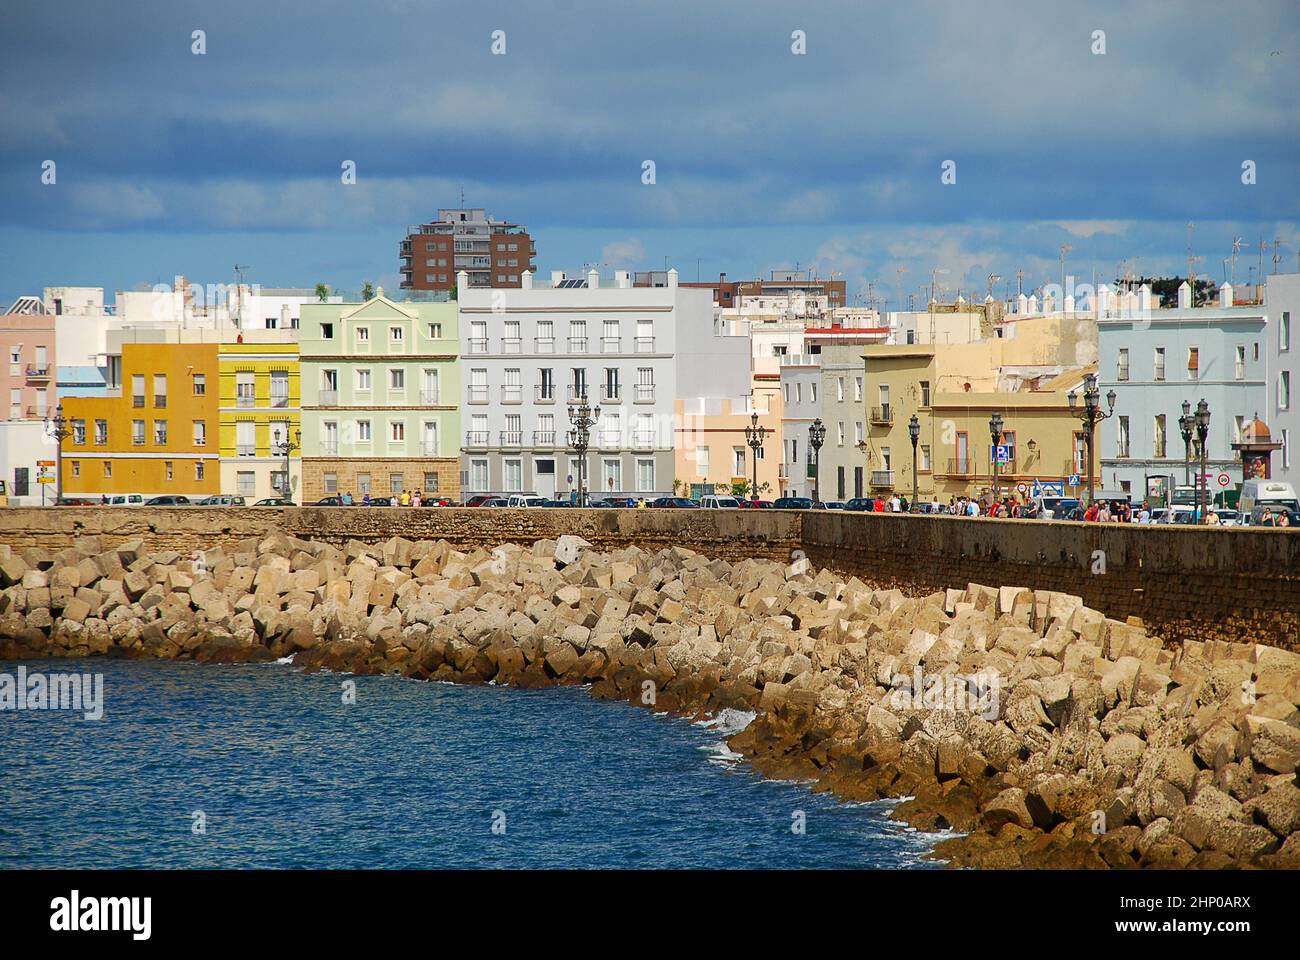 Typical houses at the waterfront in Cadiz, Spain, Avenida Campo del Sur Stock Photo